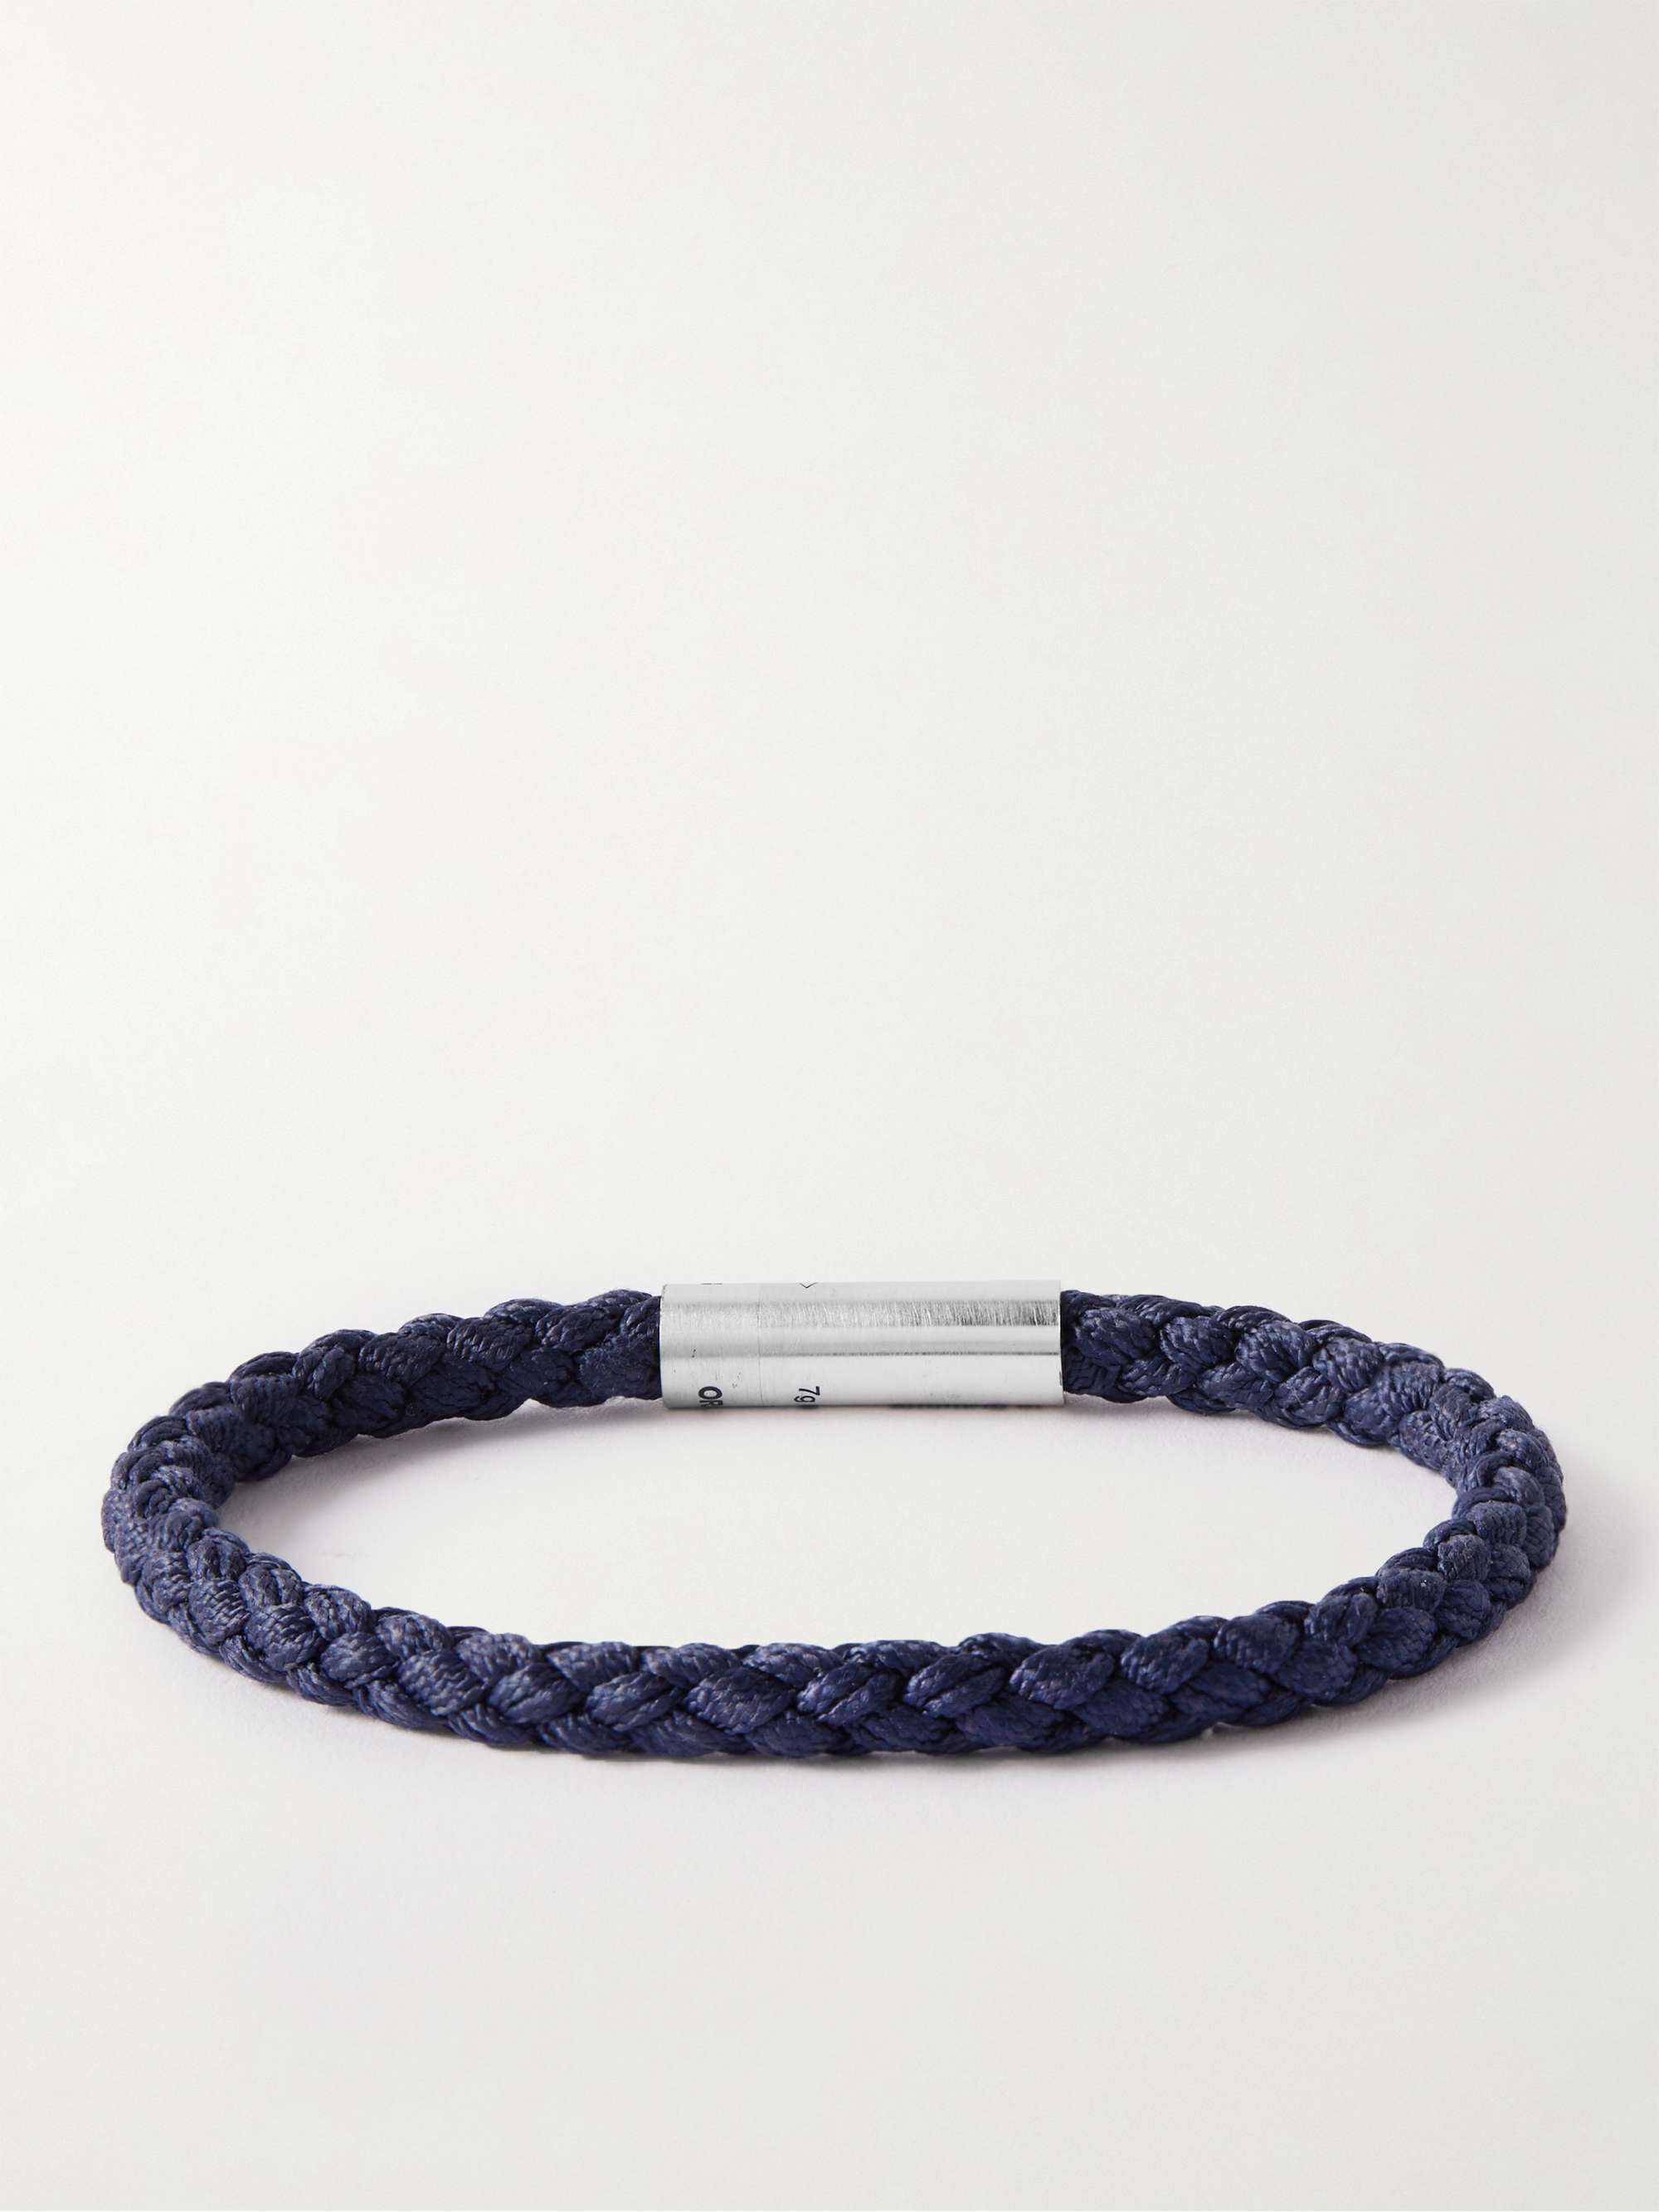 LE GRAMME + Orlebar Brown 7g Woven Cord and Sterling Silver Bracelet